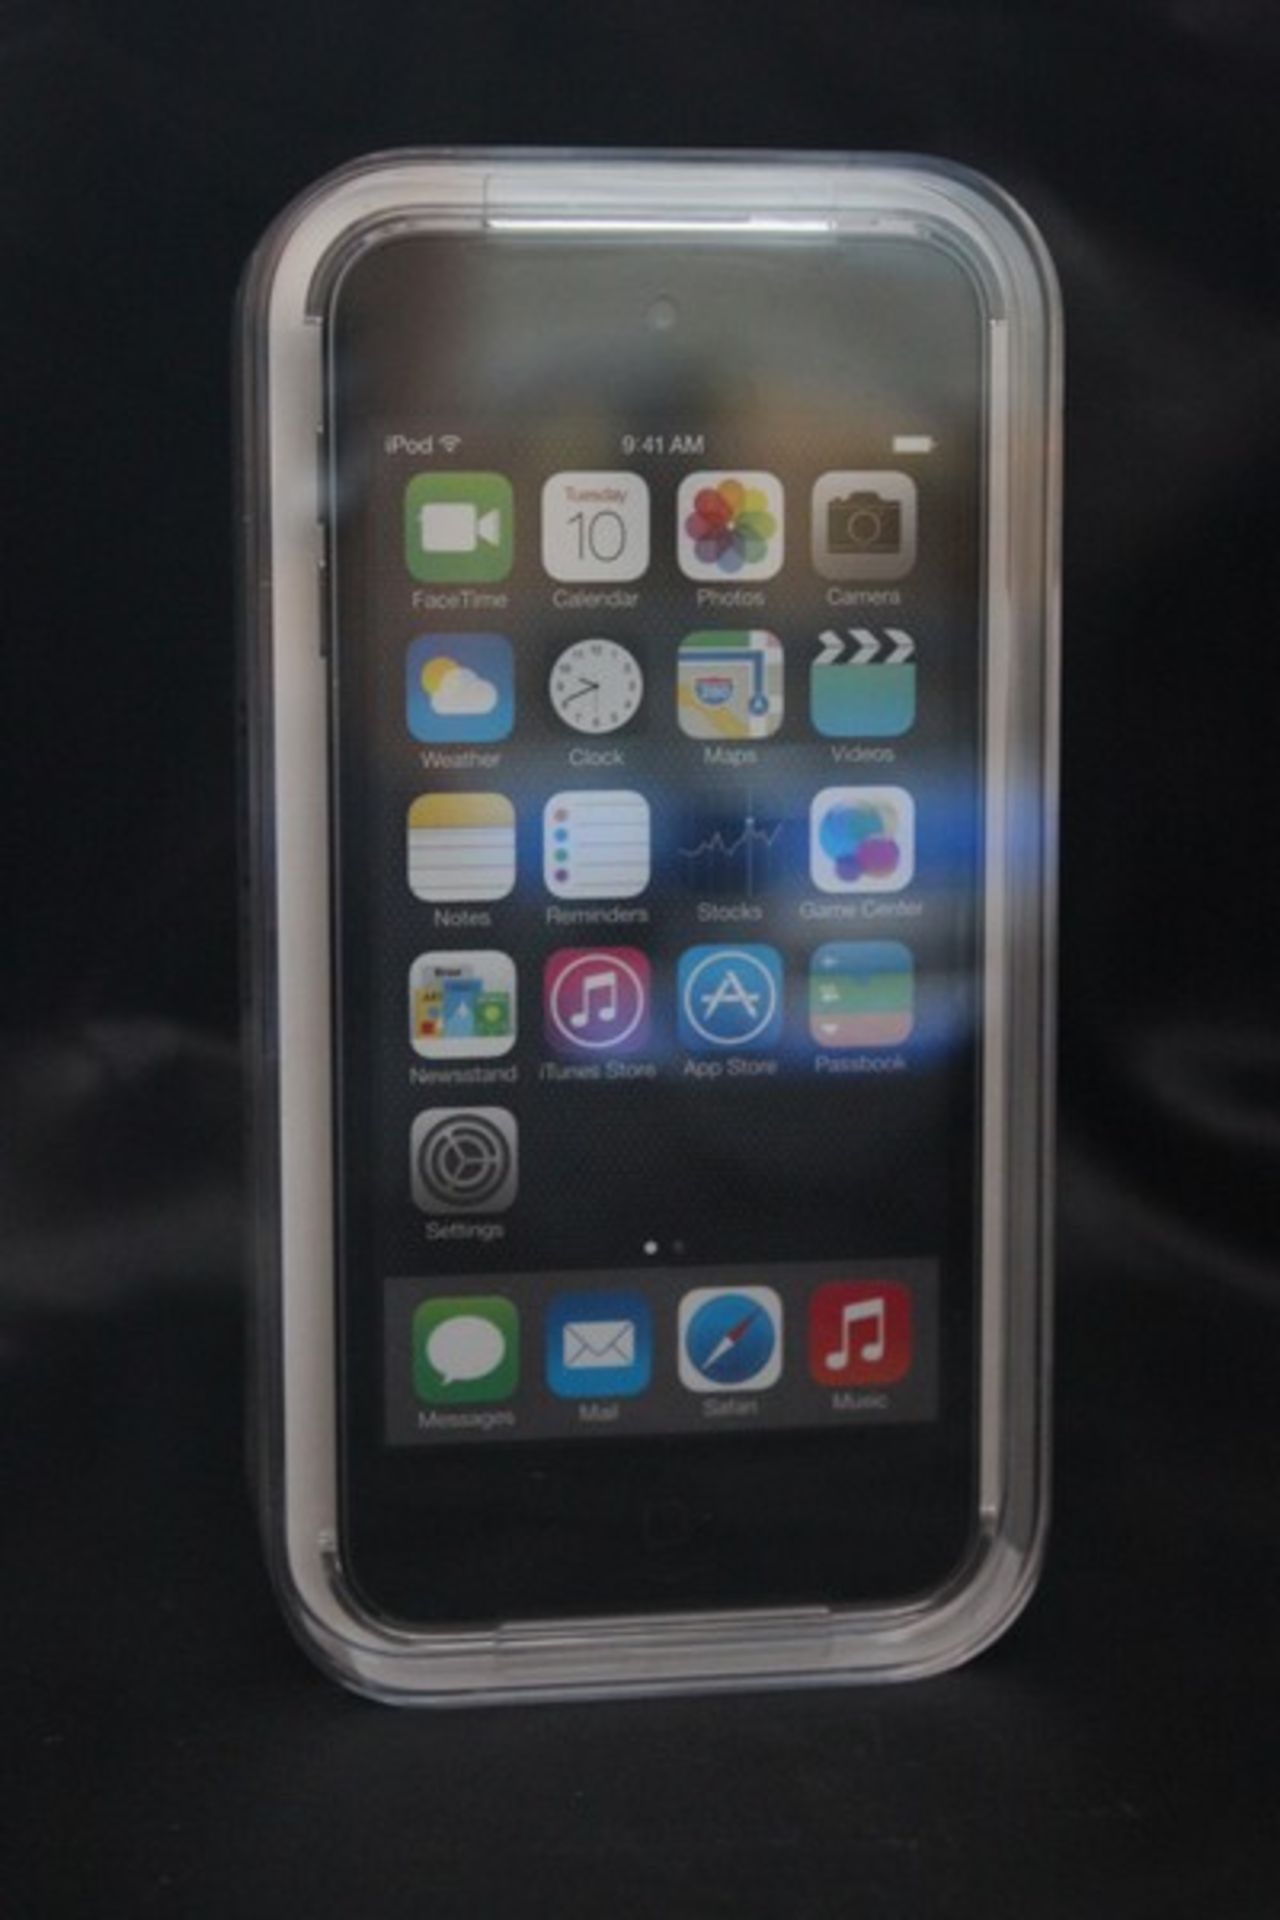 A space gray iPod Touch 32GB (Boxed as new).